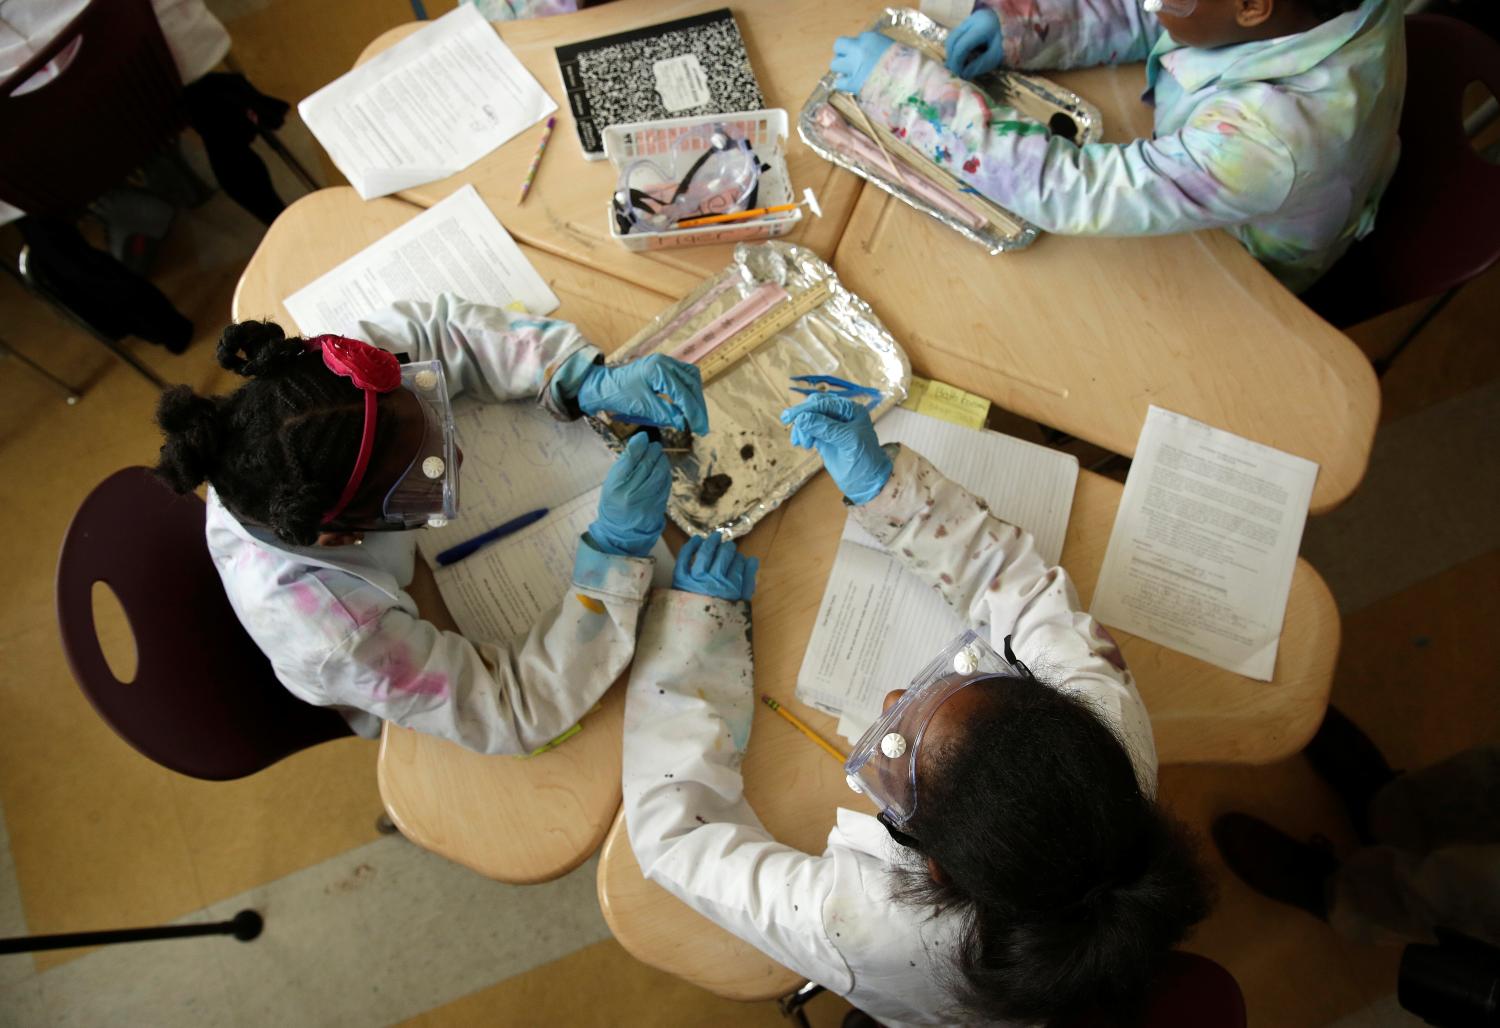 Students dissect owl pellets at the Excel Academy public charter school in Washington